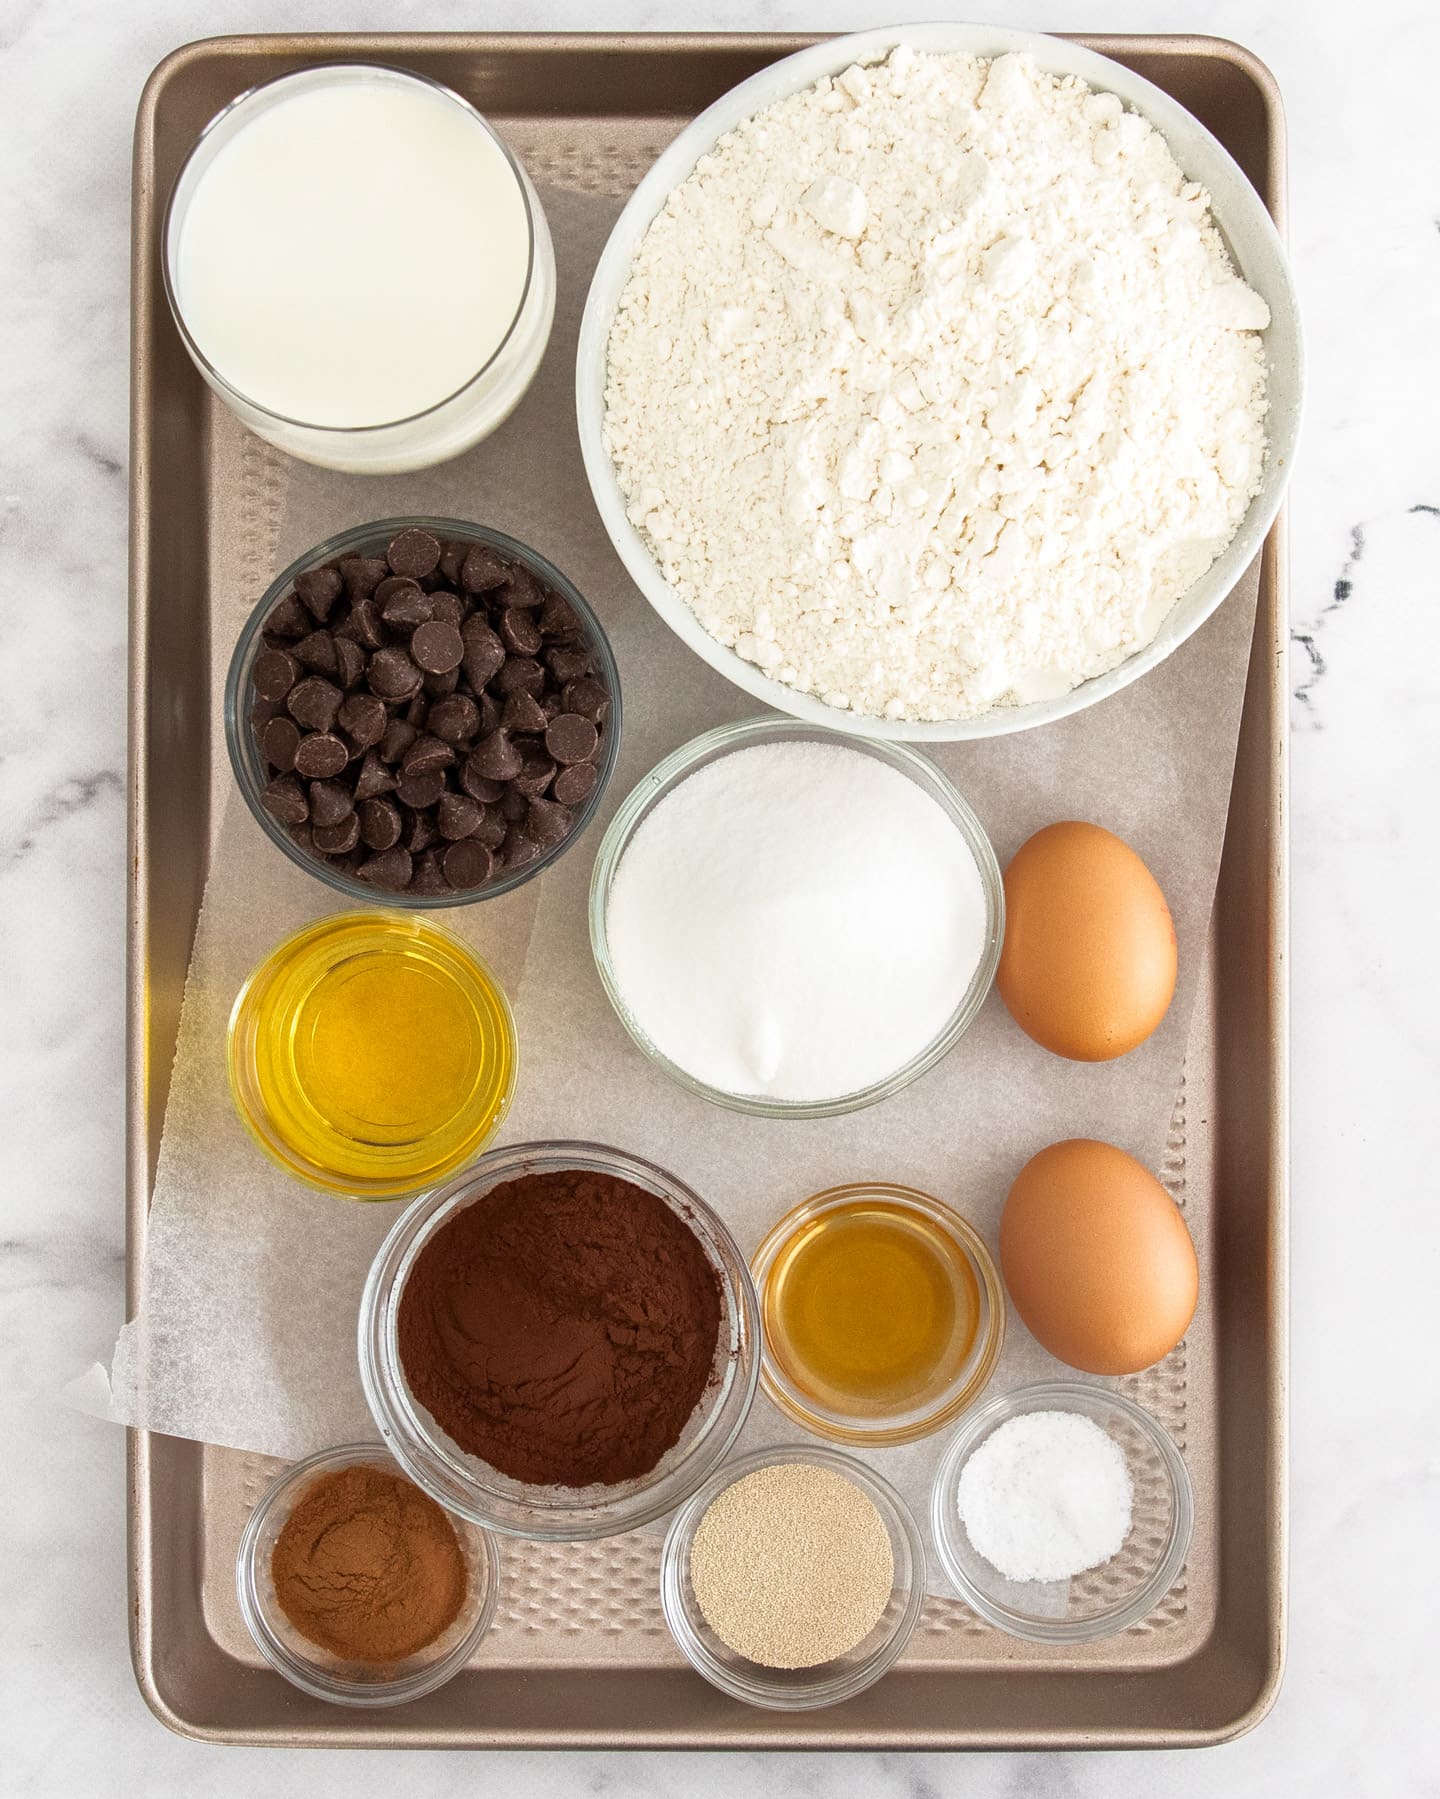 Ingredients for chocolate chip hot cross buns on a baking tray.